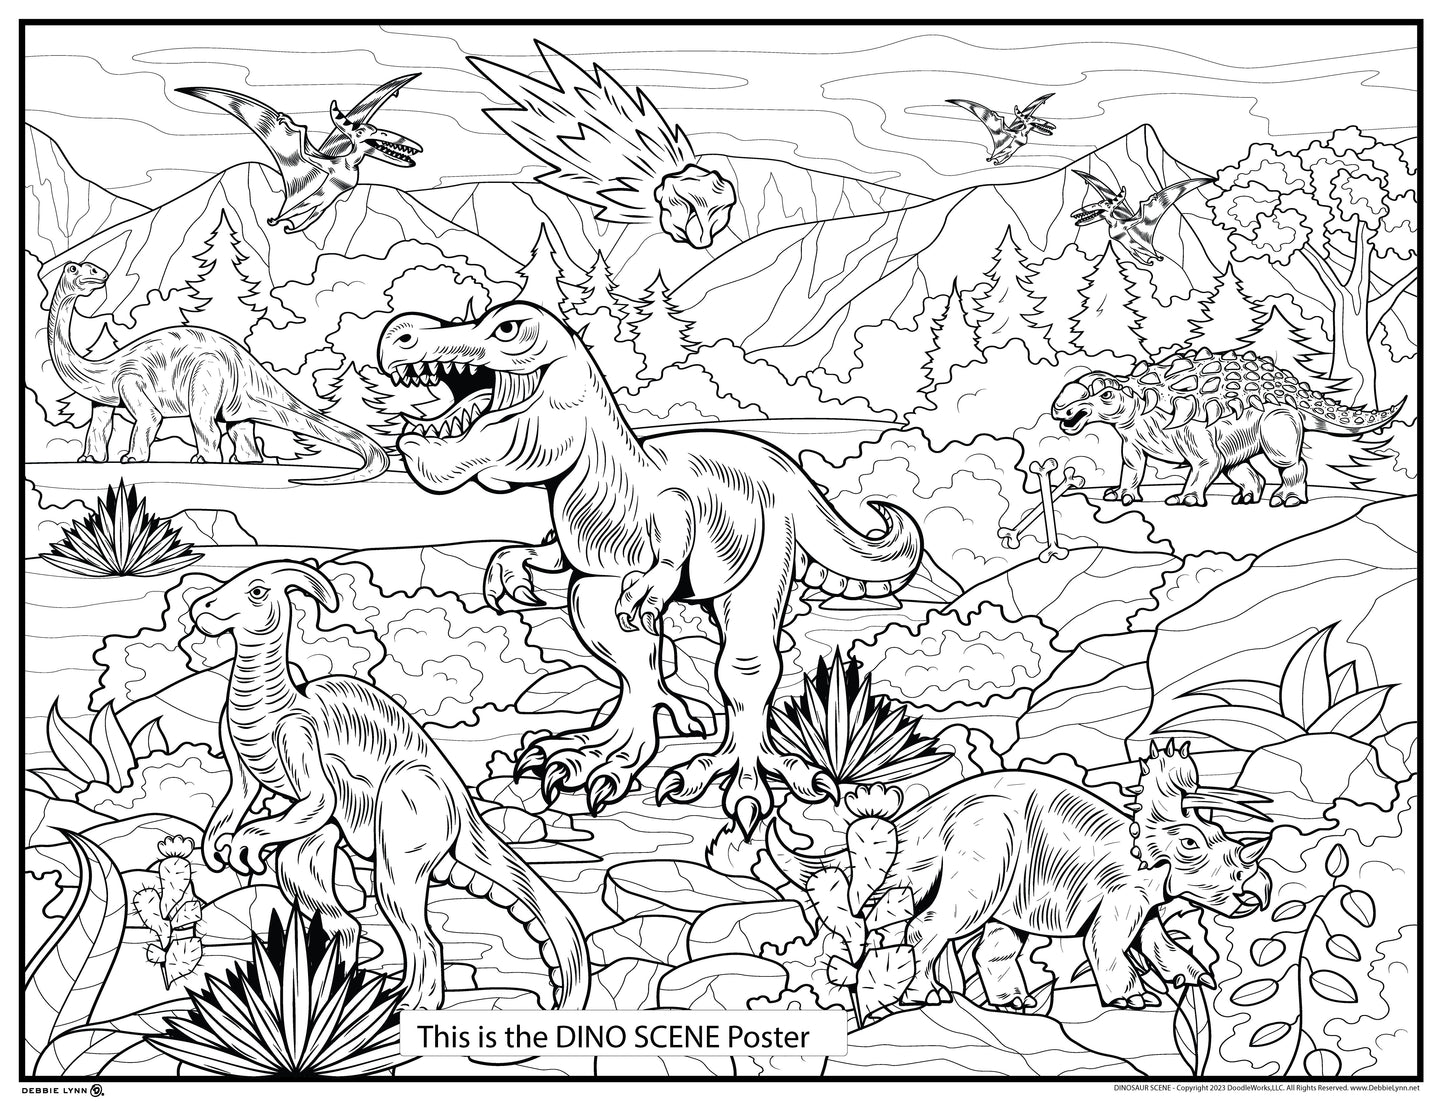 Dinosaur Scene Personalized Giant Coloring Poster 46"x60"